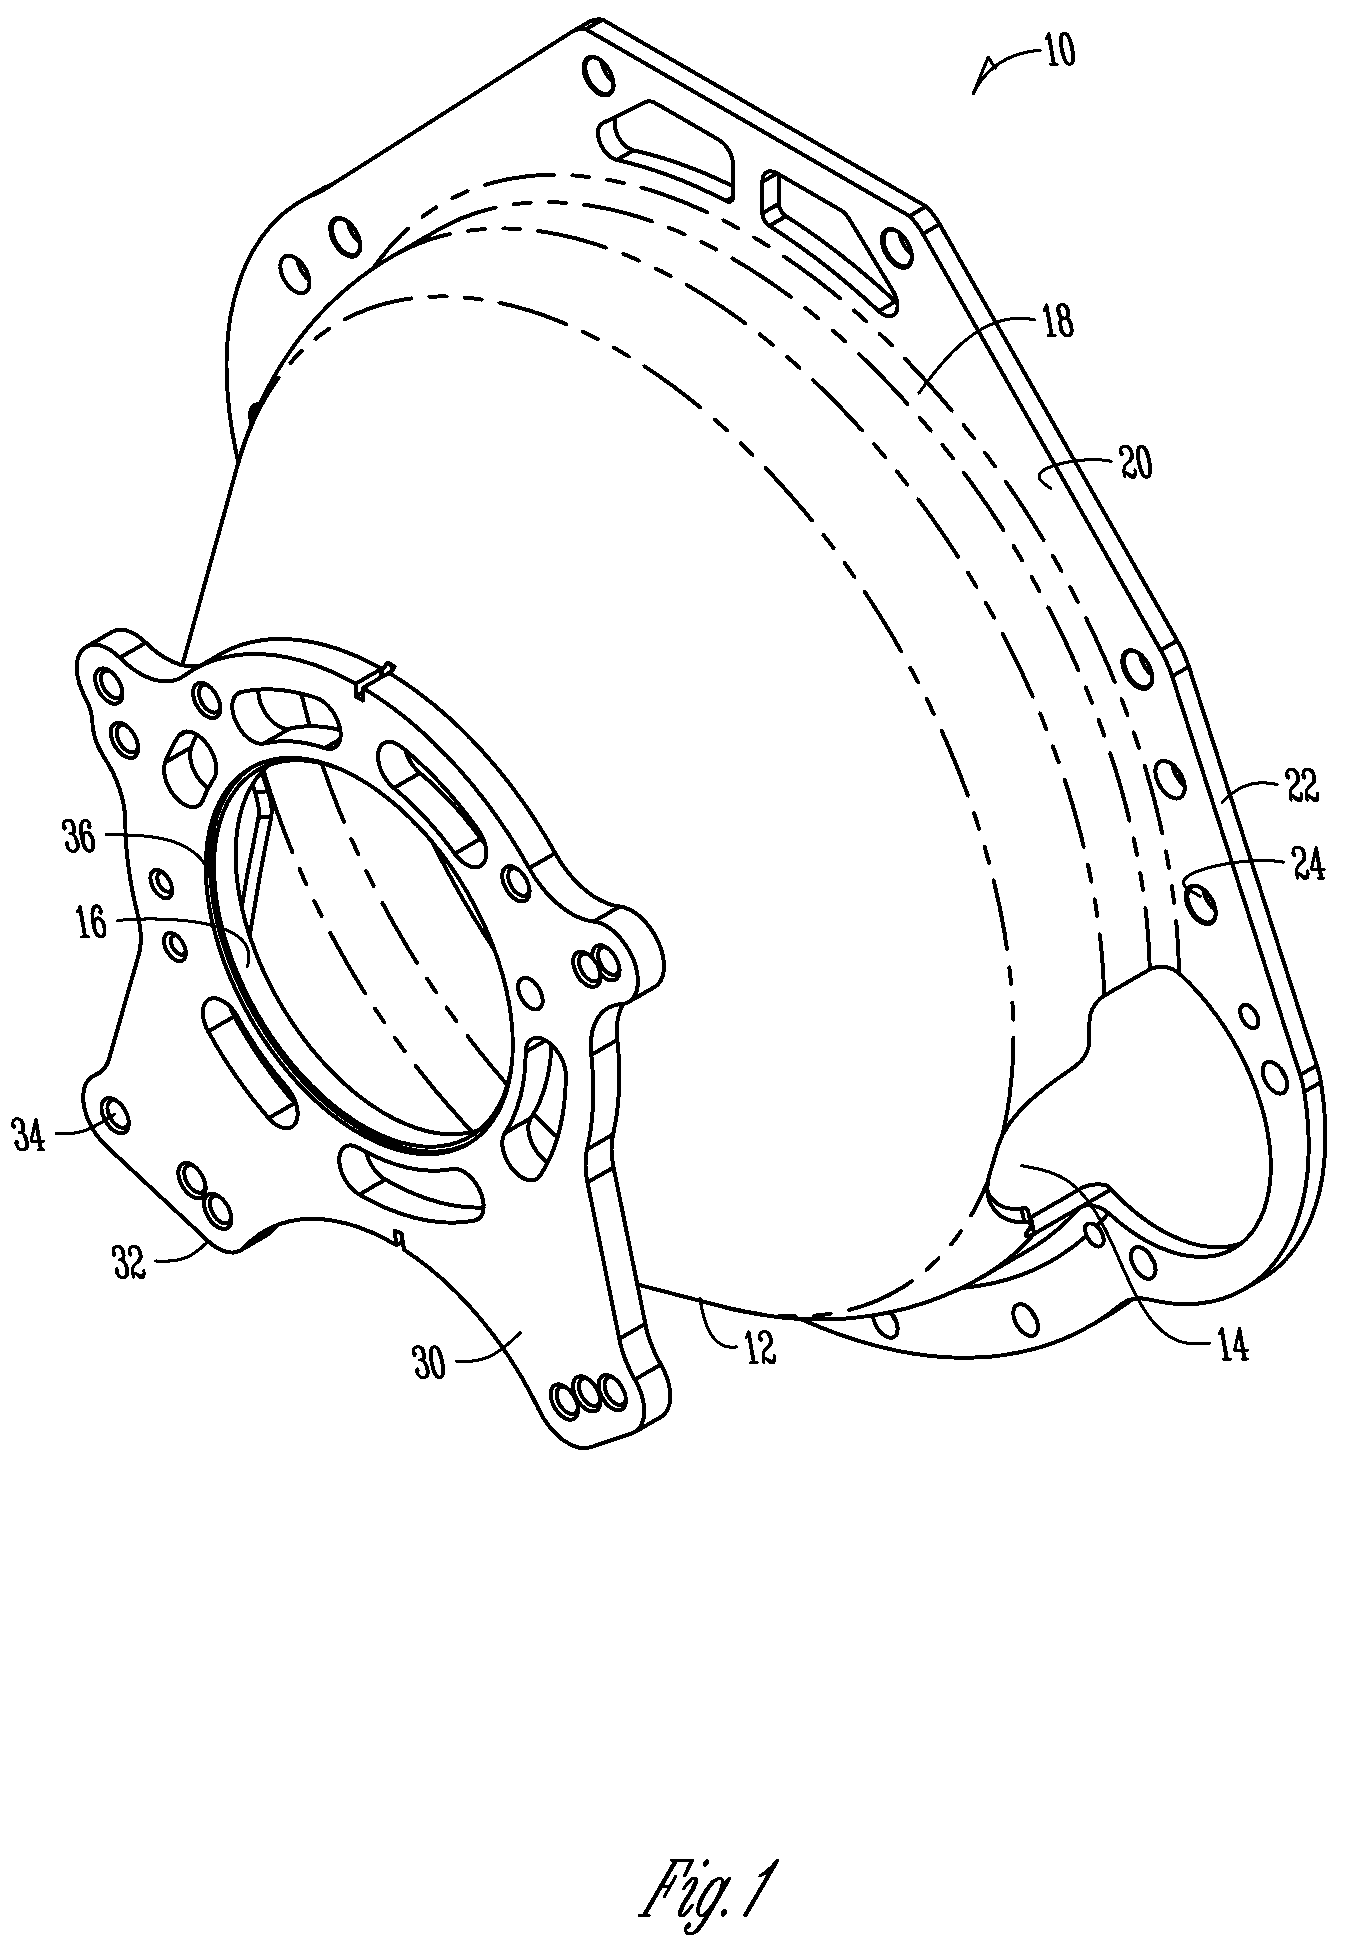 Method to provide a universal bellhousing between an engine and transmission of a vehicle